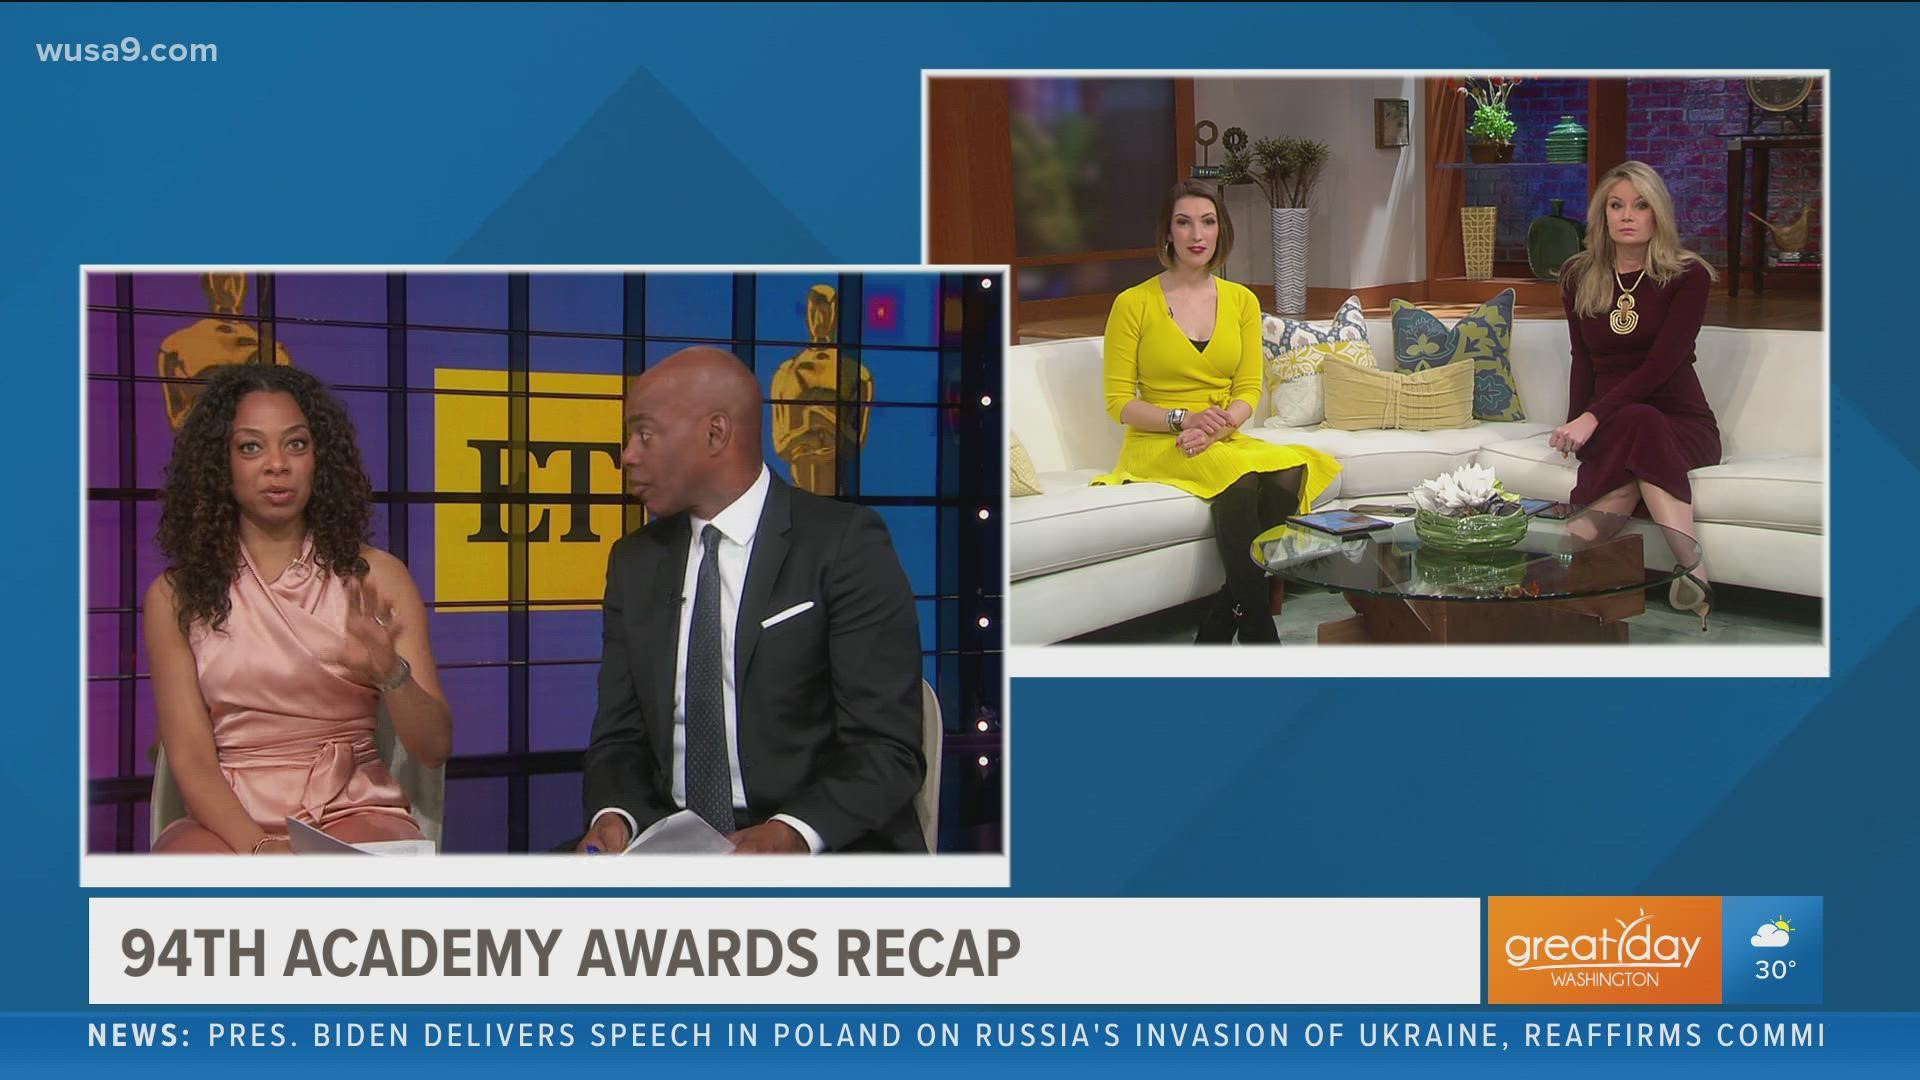 ET hosts Kevin Frazier and Nichelle Turner talk about Hollywood's biggest night including the "slap heard around the world" and the big winners.